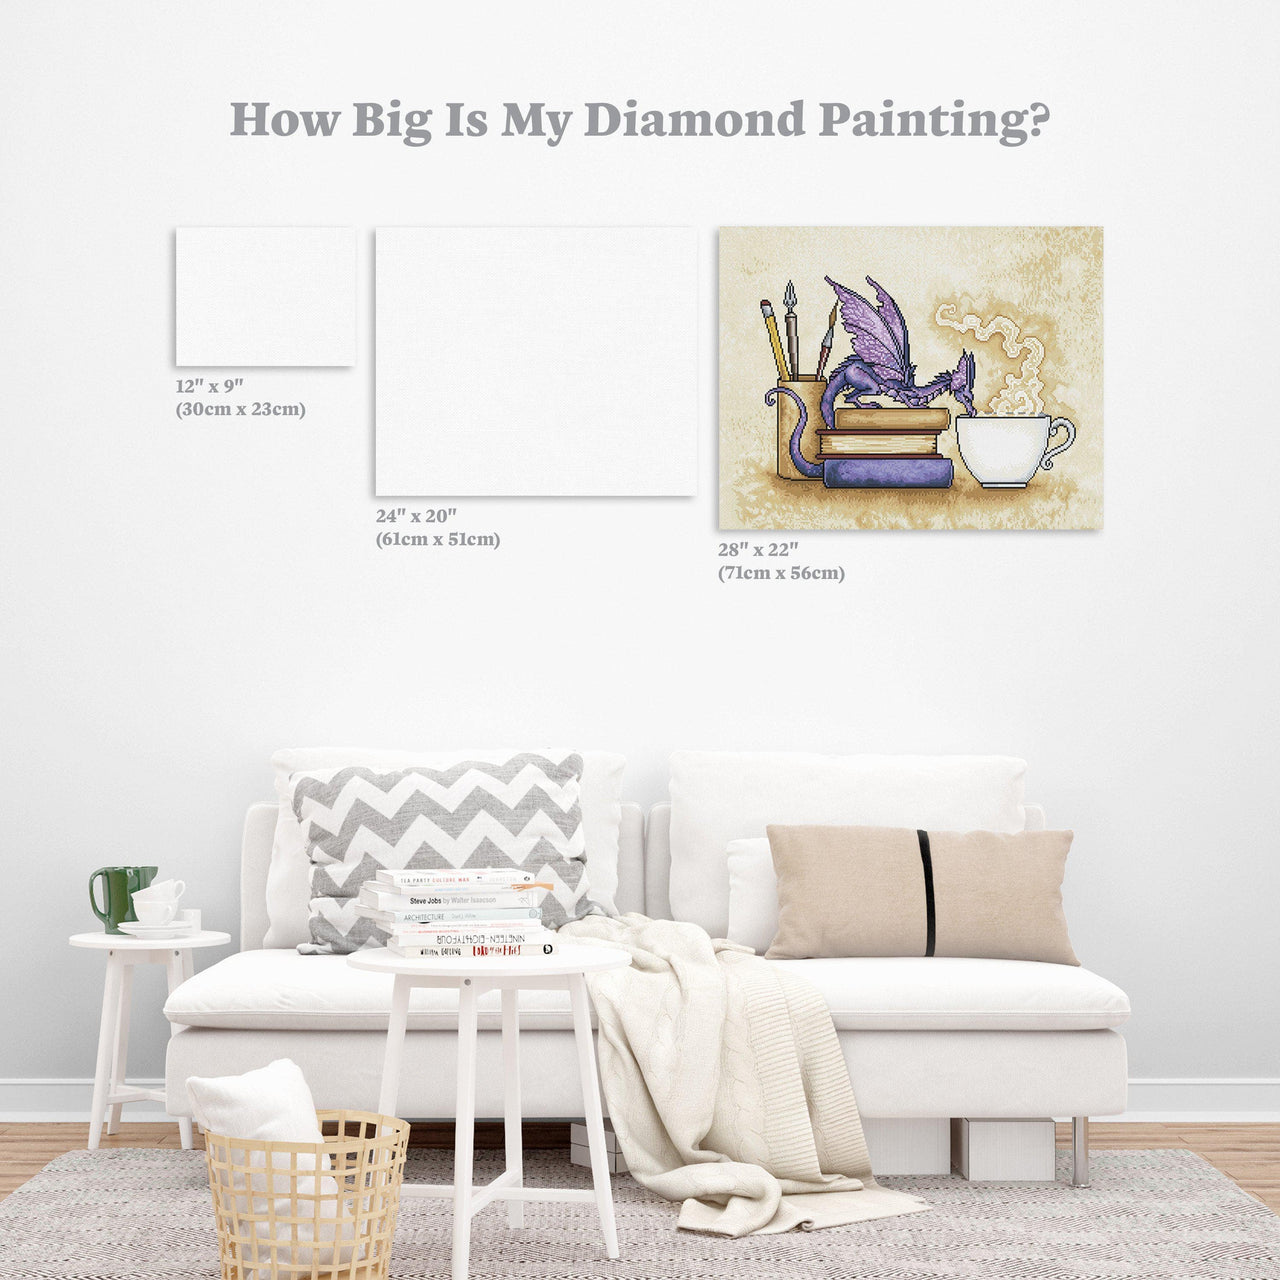 Diamond Painting Whats In Here 28" x 22" (71cm x 56cm) / Round with 35 Colors including 5 ABs / 50,148